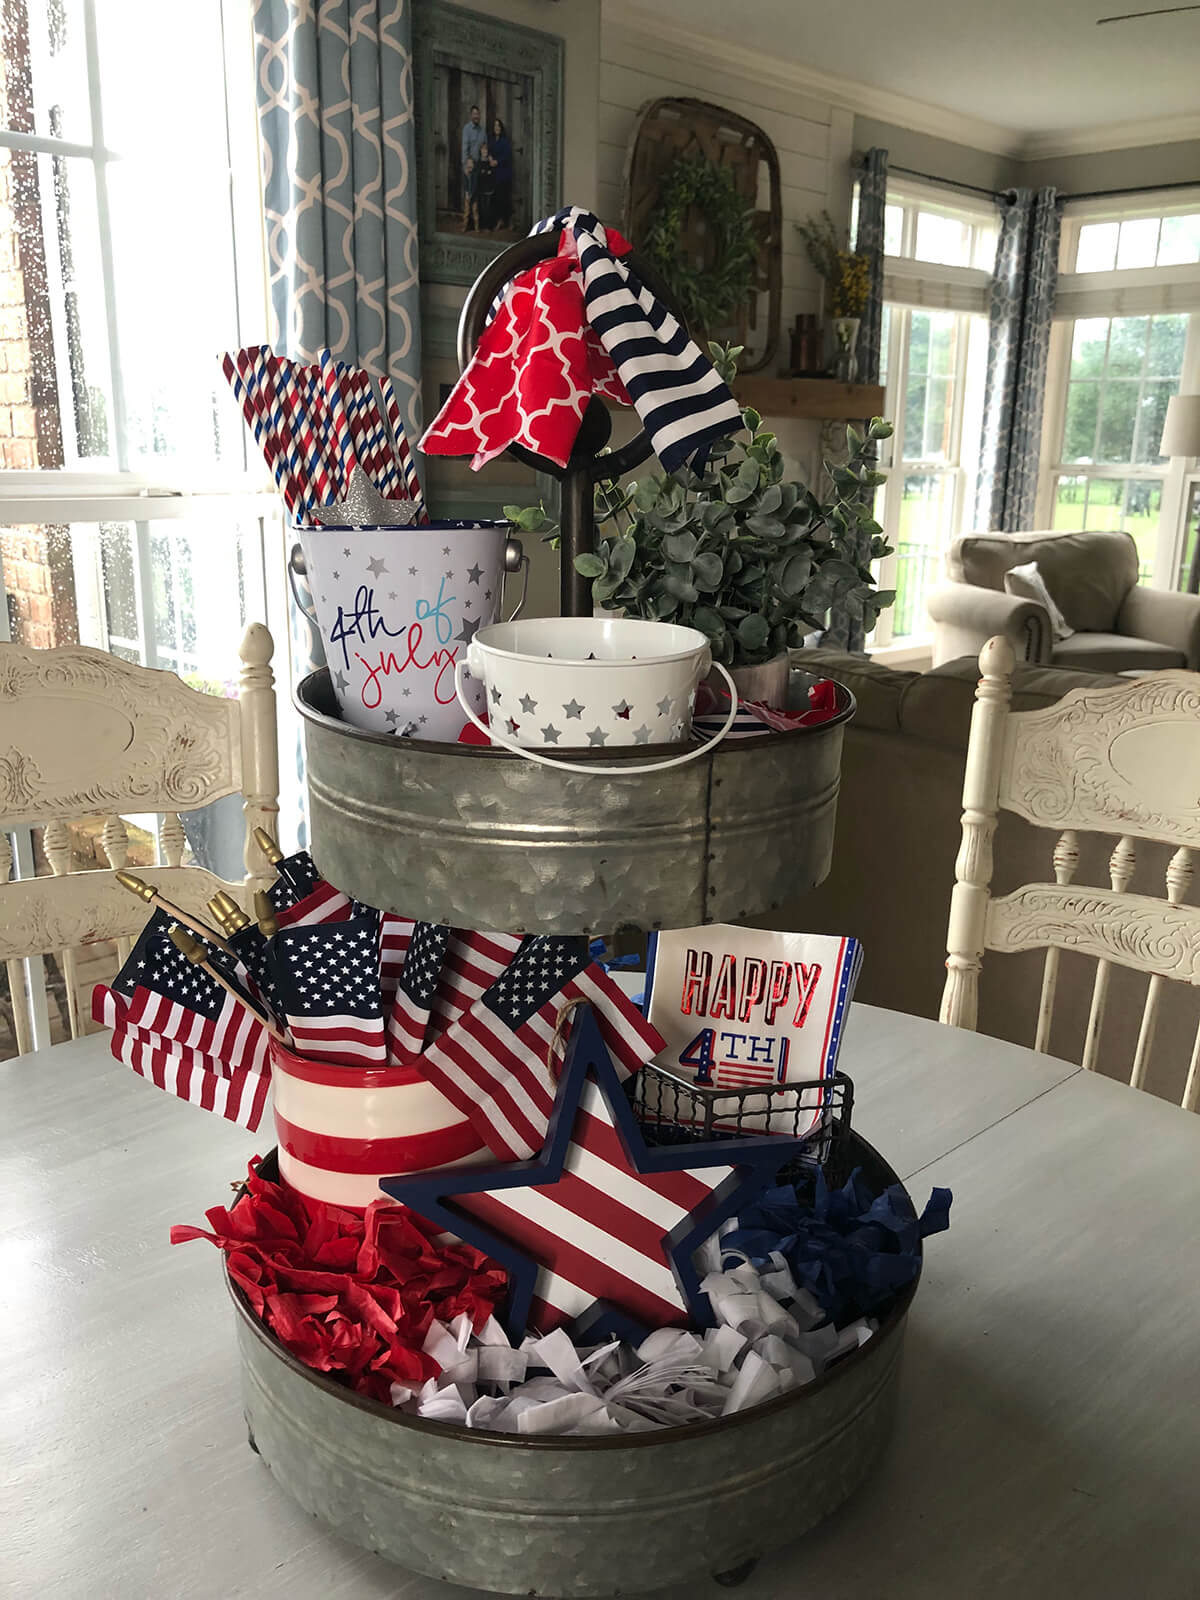 Multi-Tiered Tray Stuffed with Patriotic Goodies